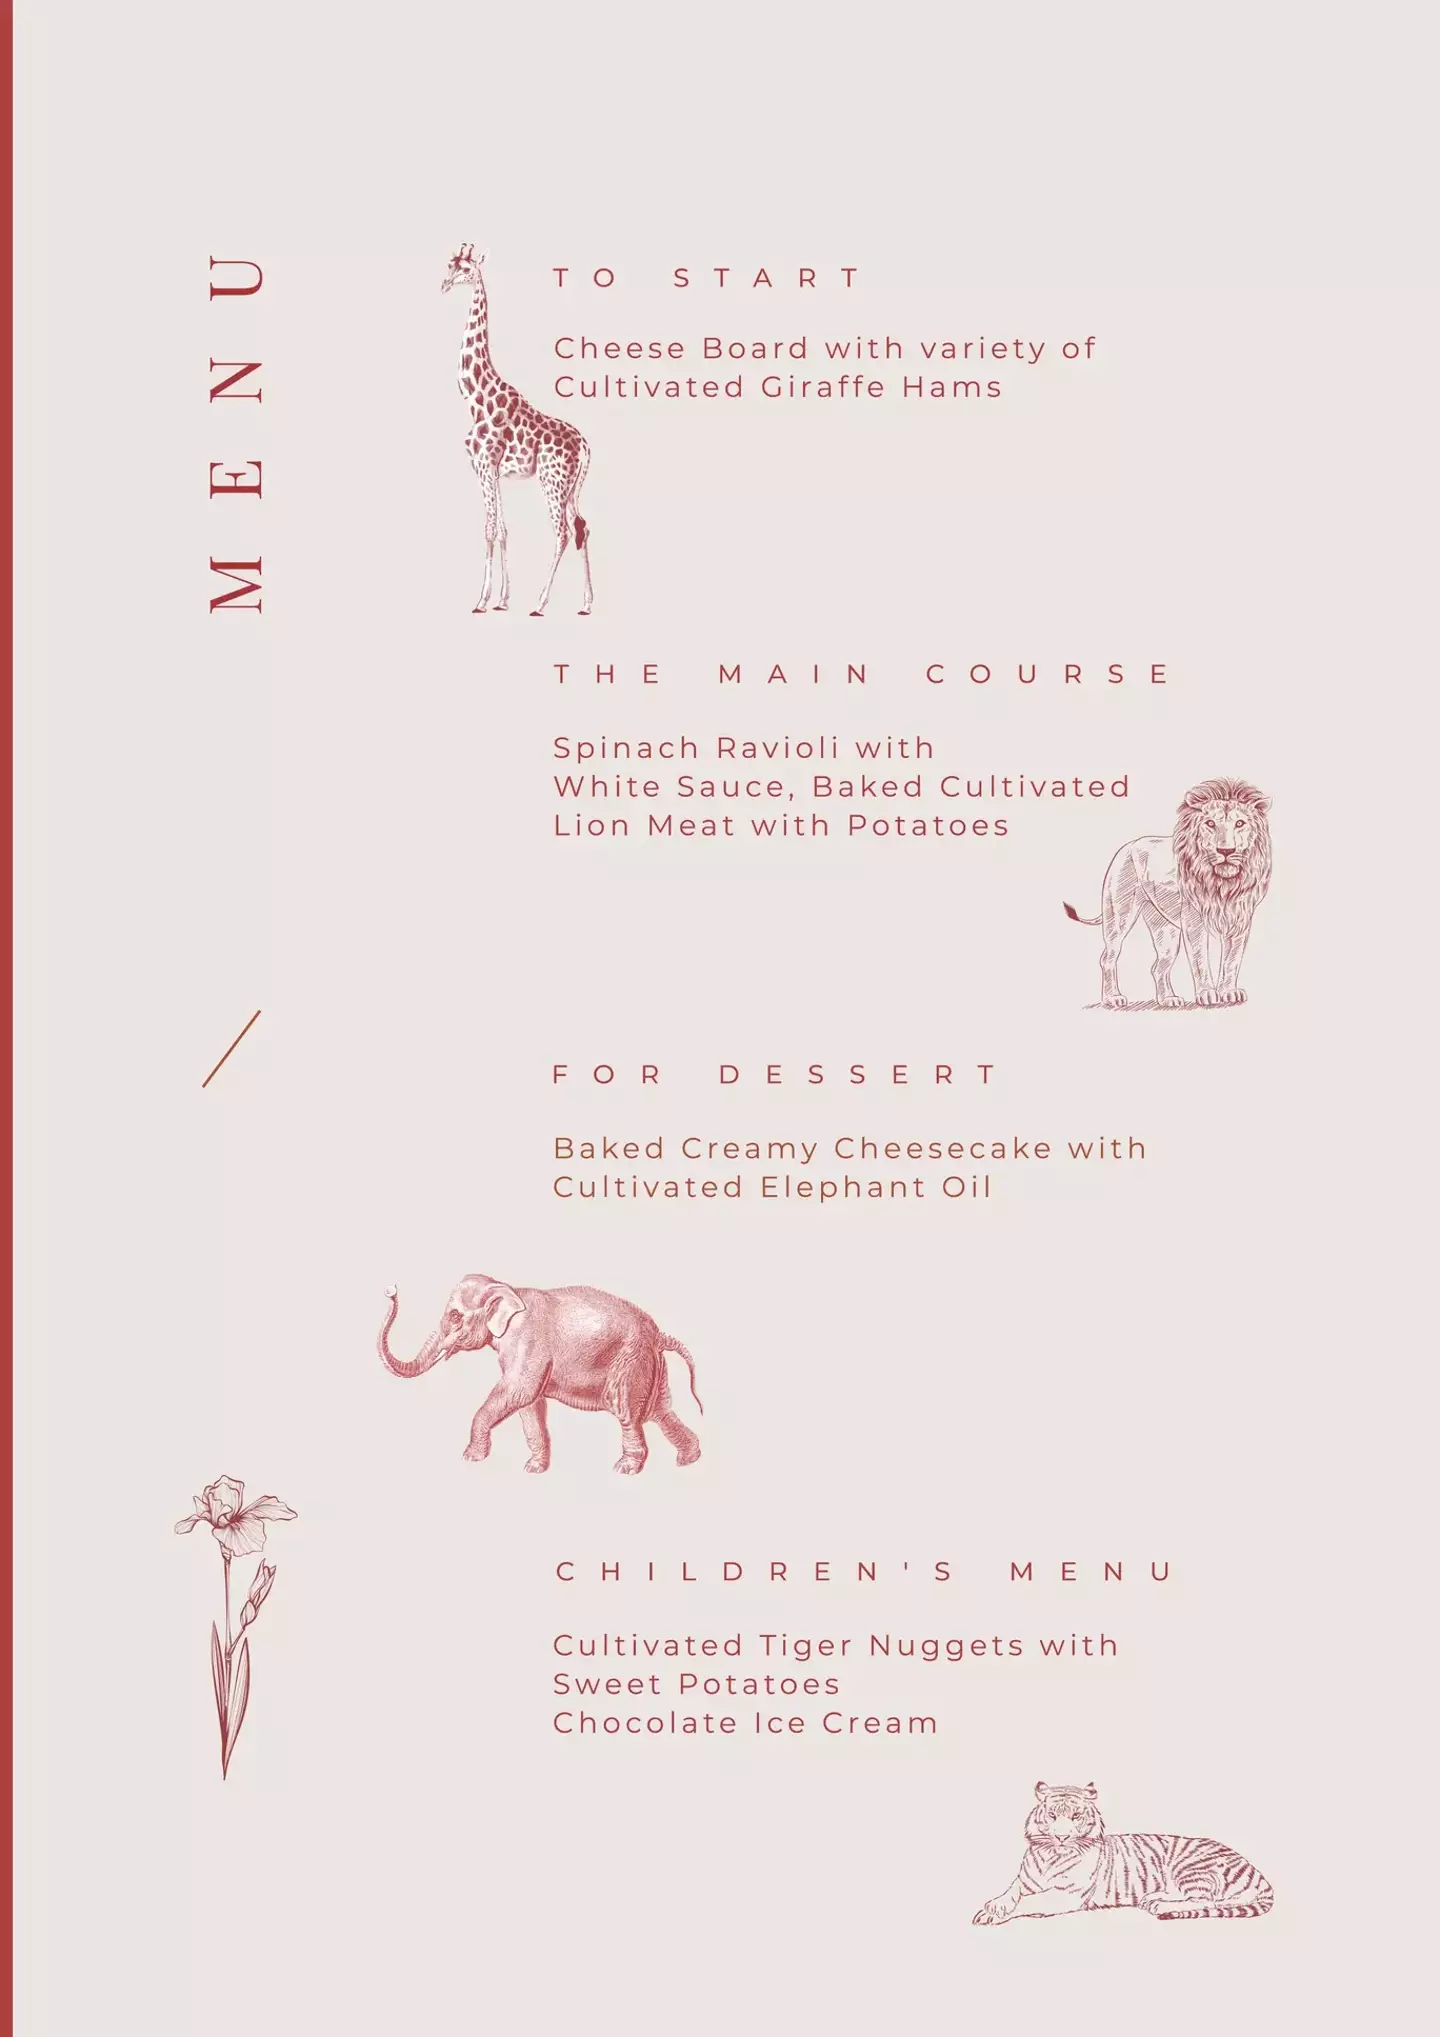 A concept menu from the future.